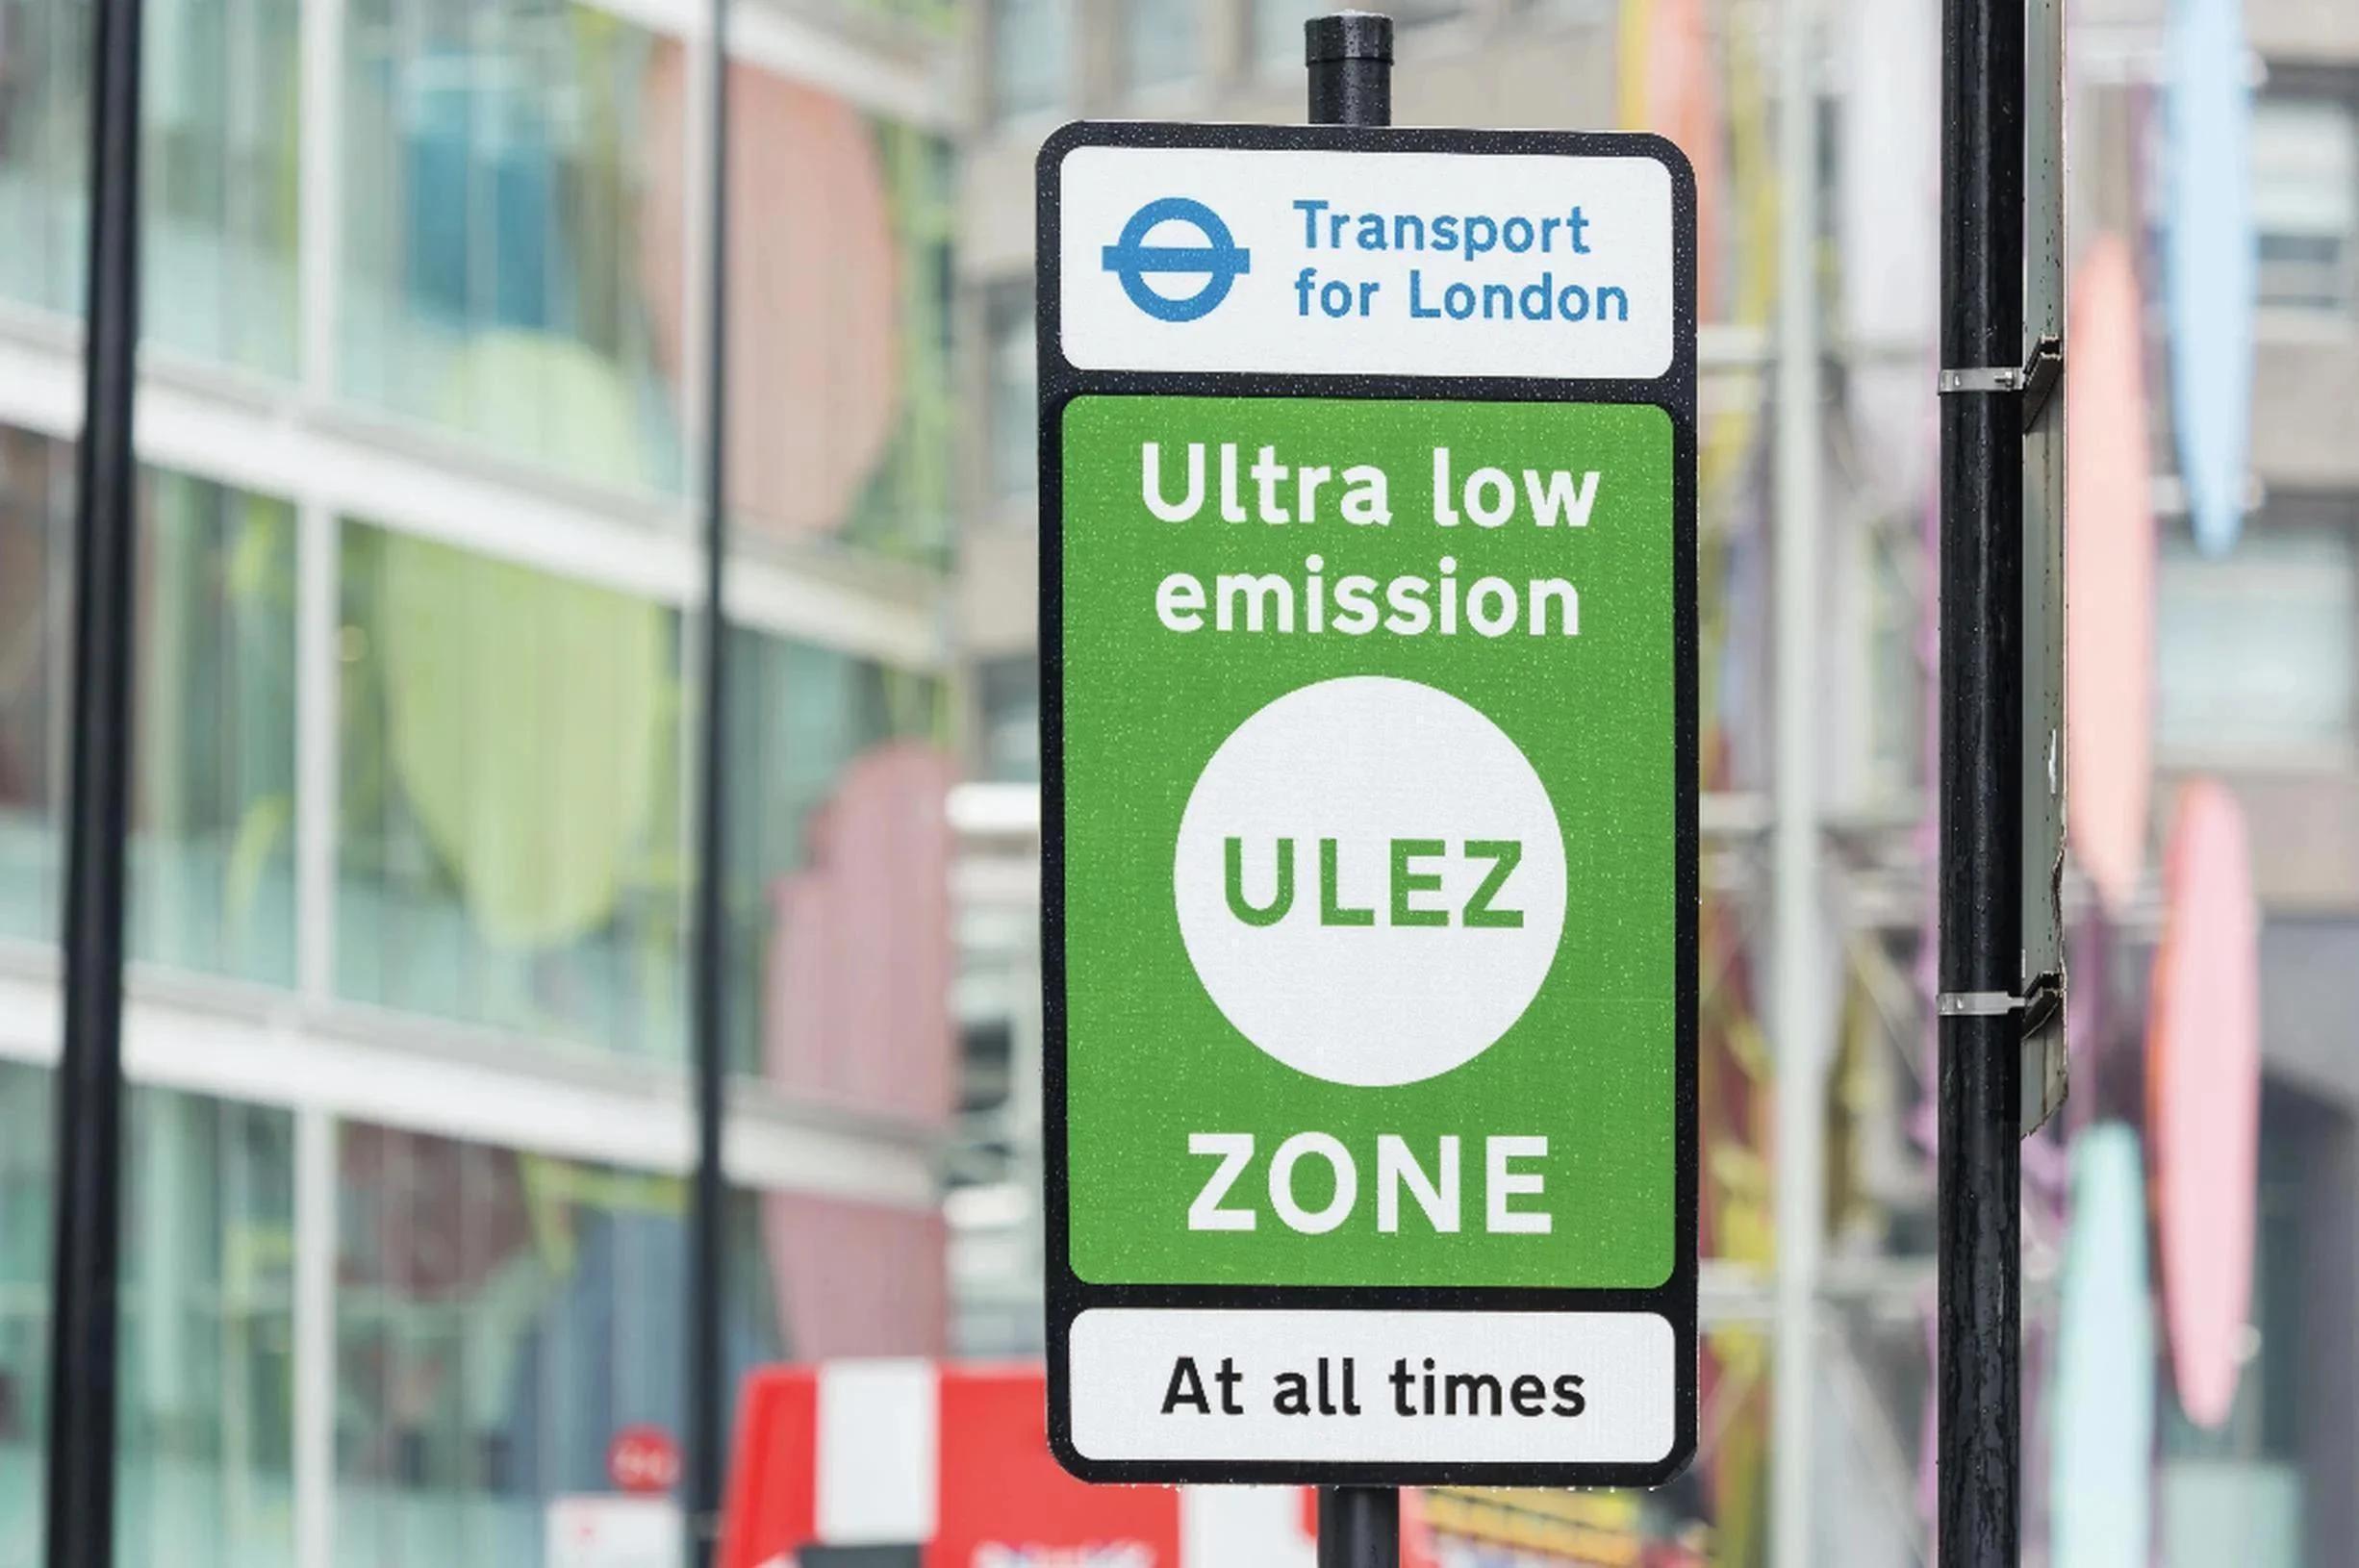 There has been a significant
fall in ULEZ sales since the introduction of London’s ultra low emission zone, survey found